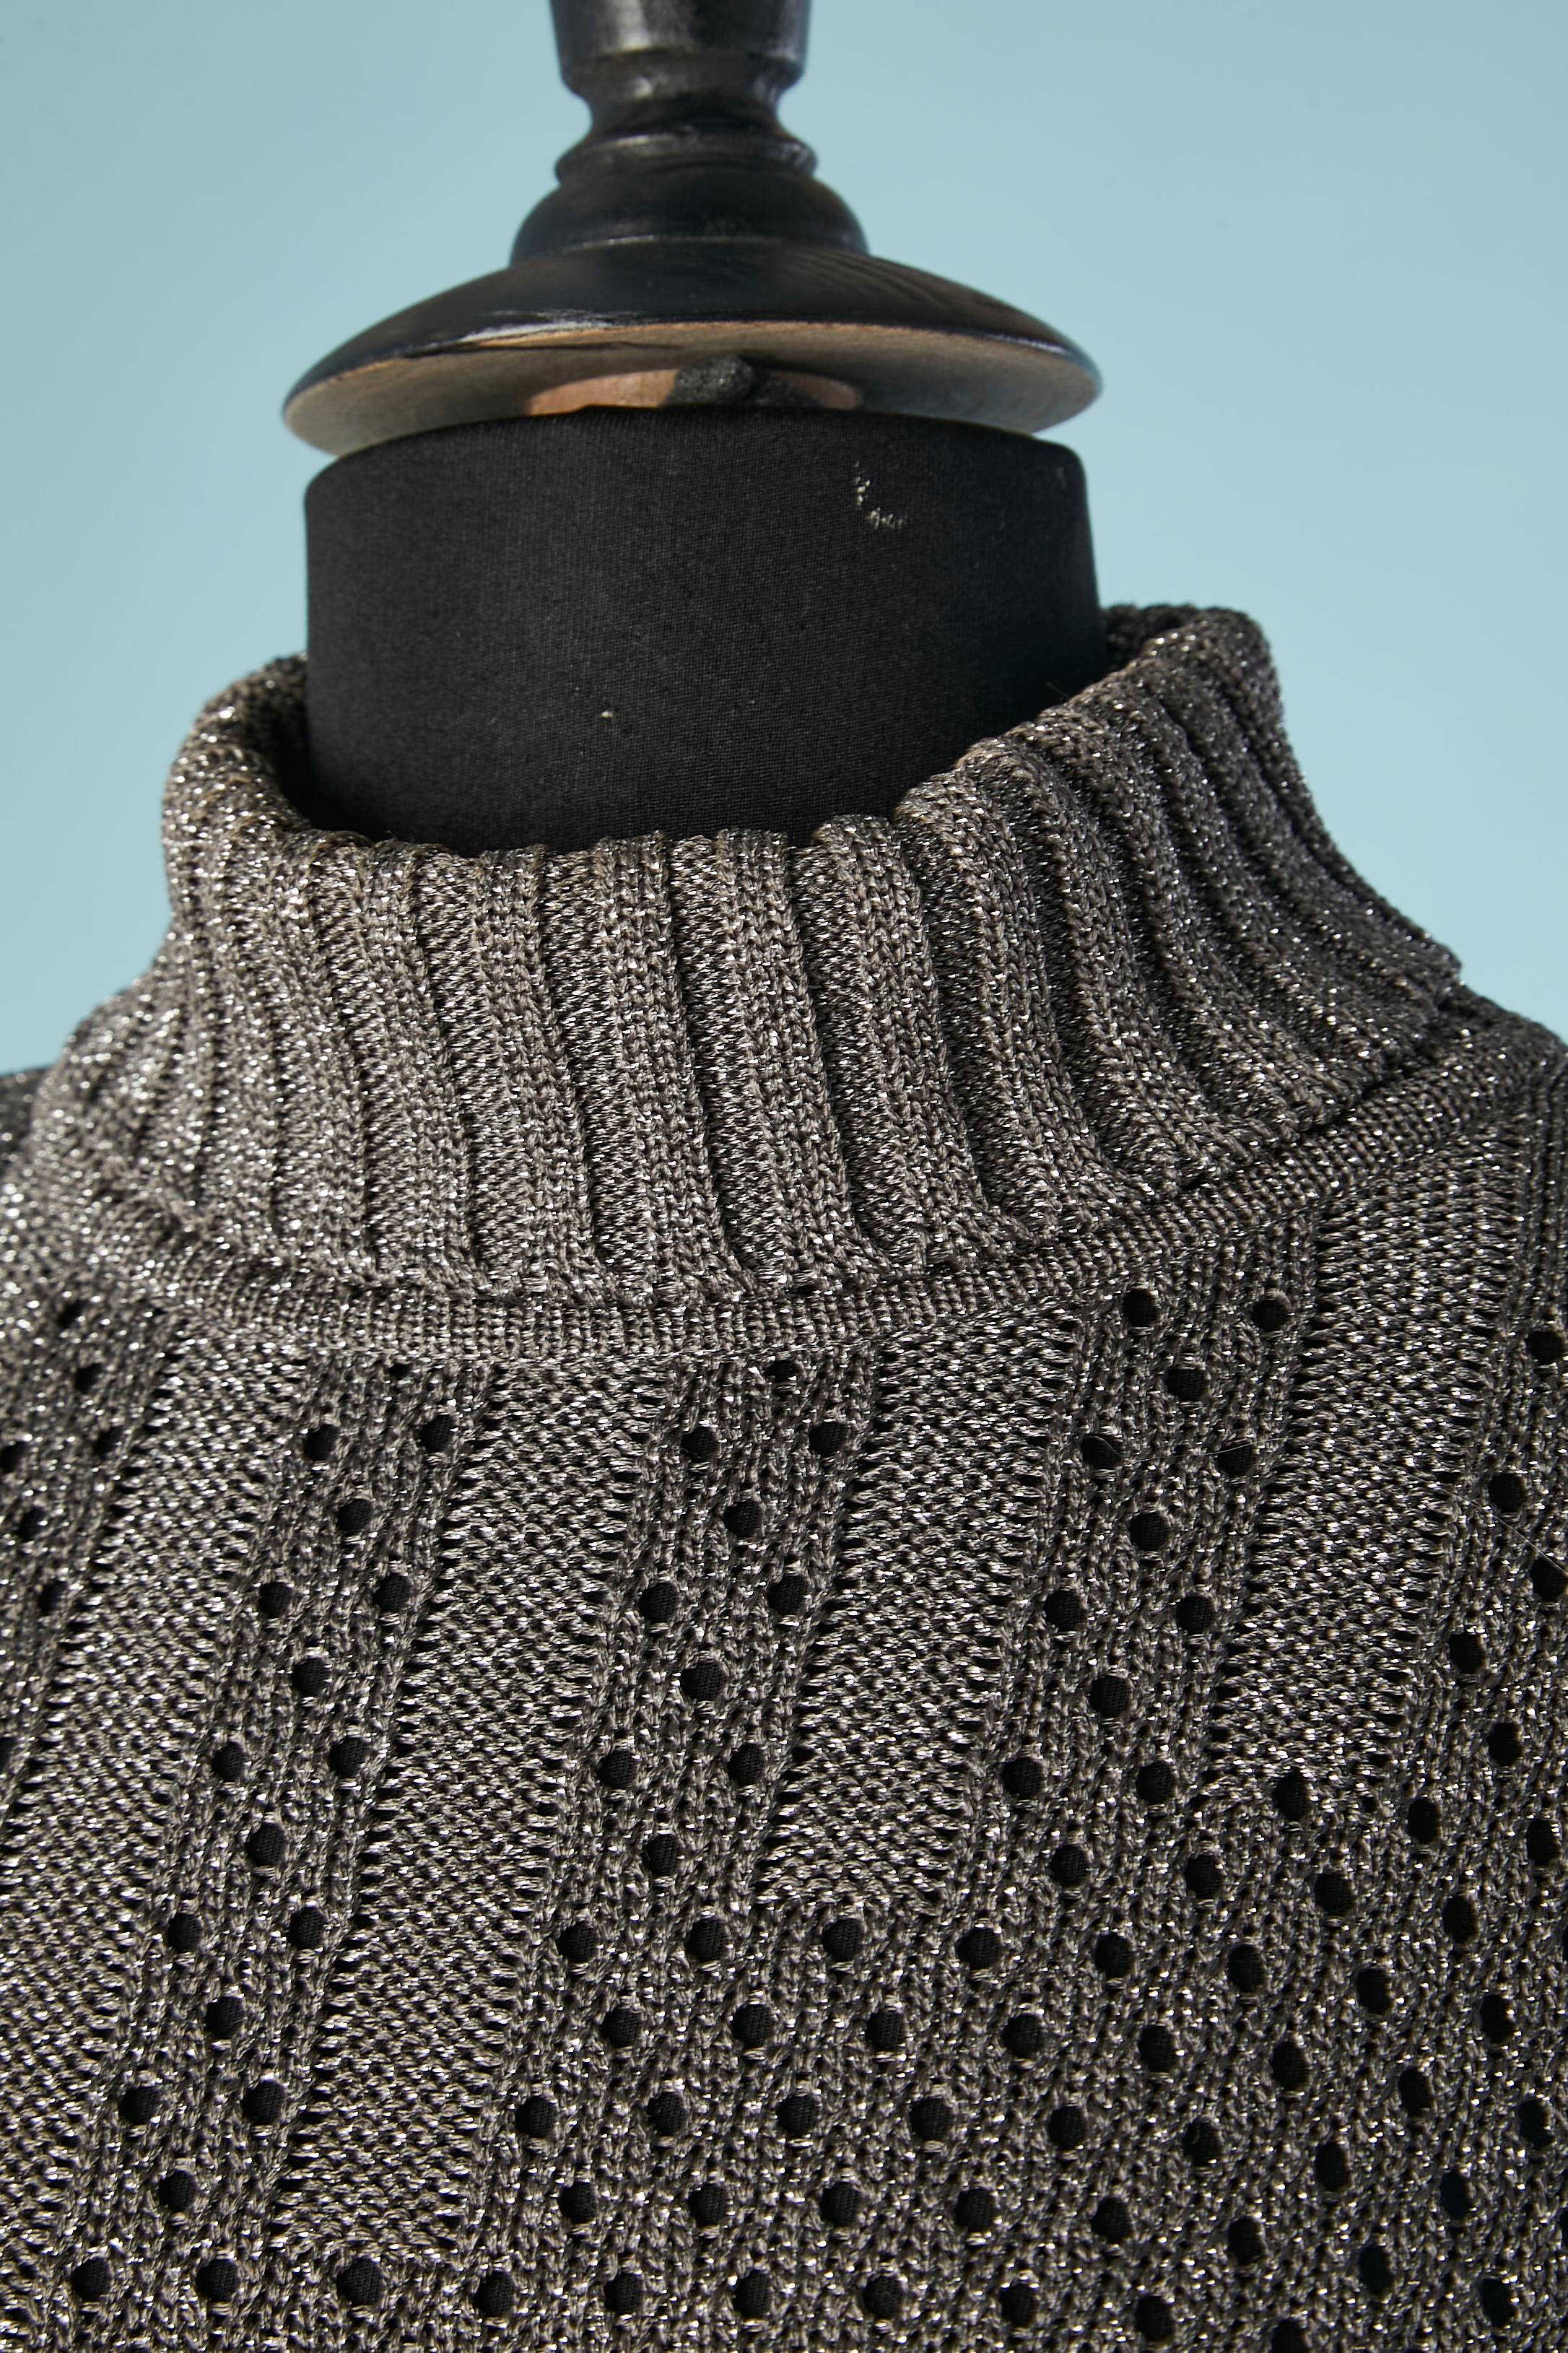 Grey lurex see-through turtle neck sweater.
Knit composition: 84% rayon, 16% polyester
SIZE S